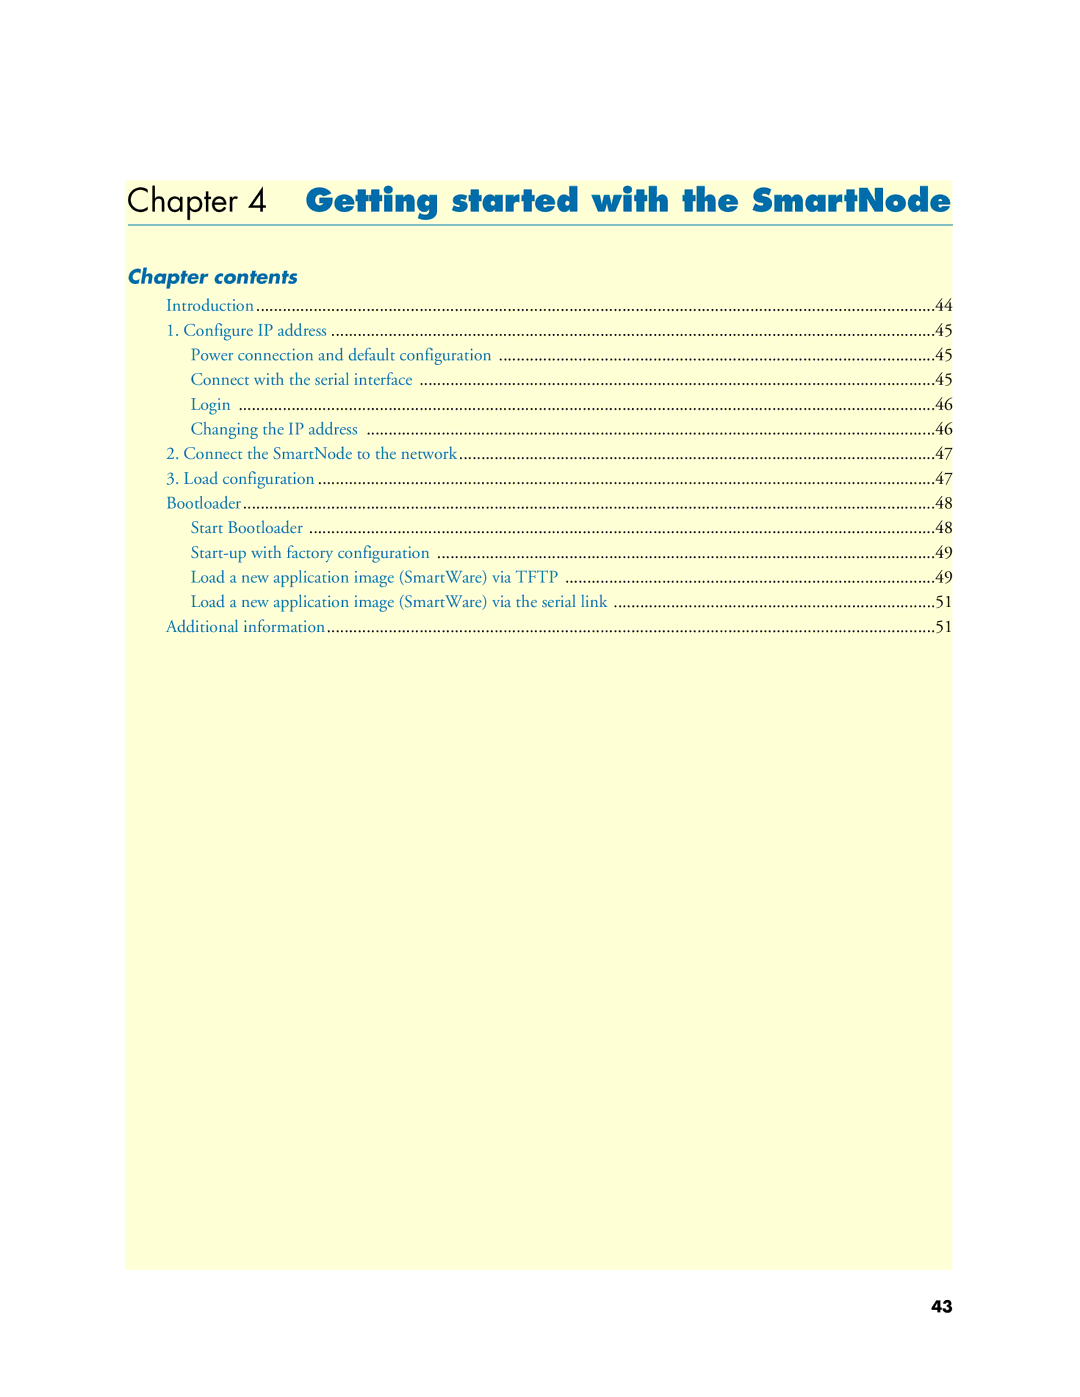 Patton electronic 4830 manual Getting started with the SmartNode, Chapter contents 